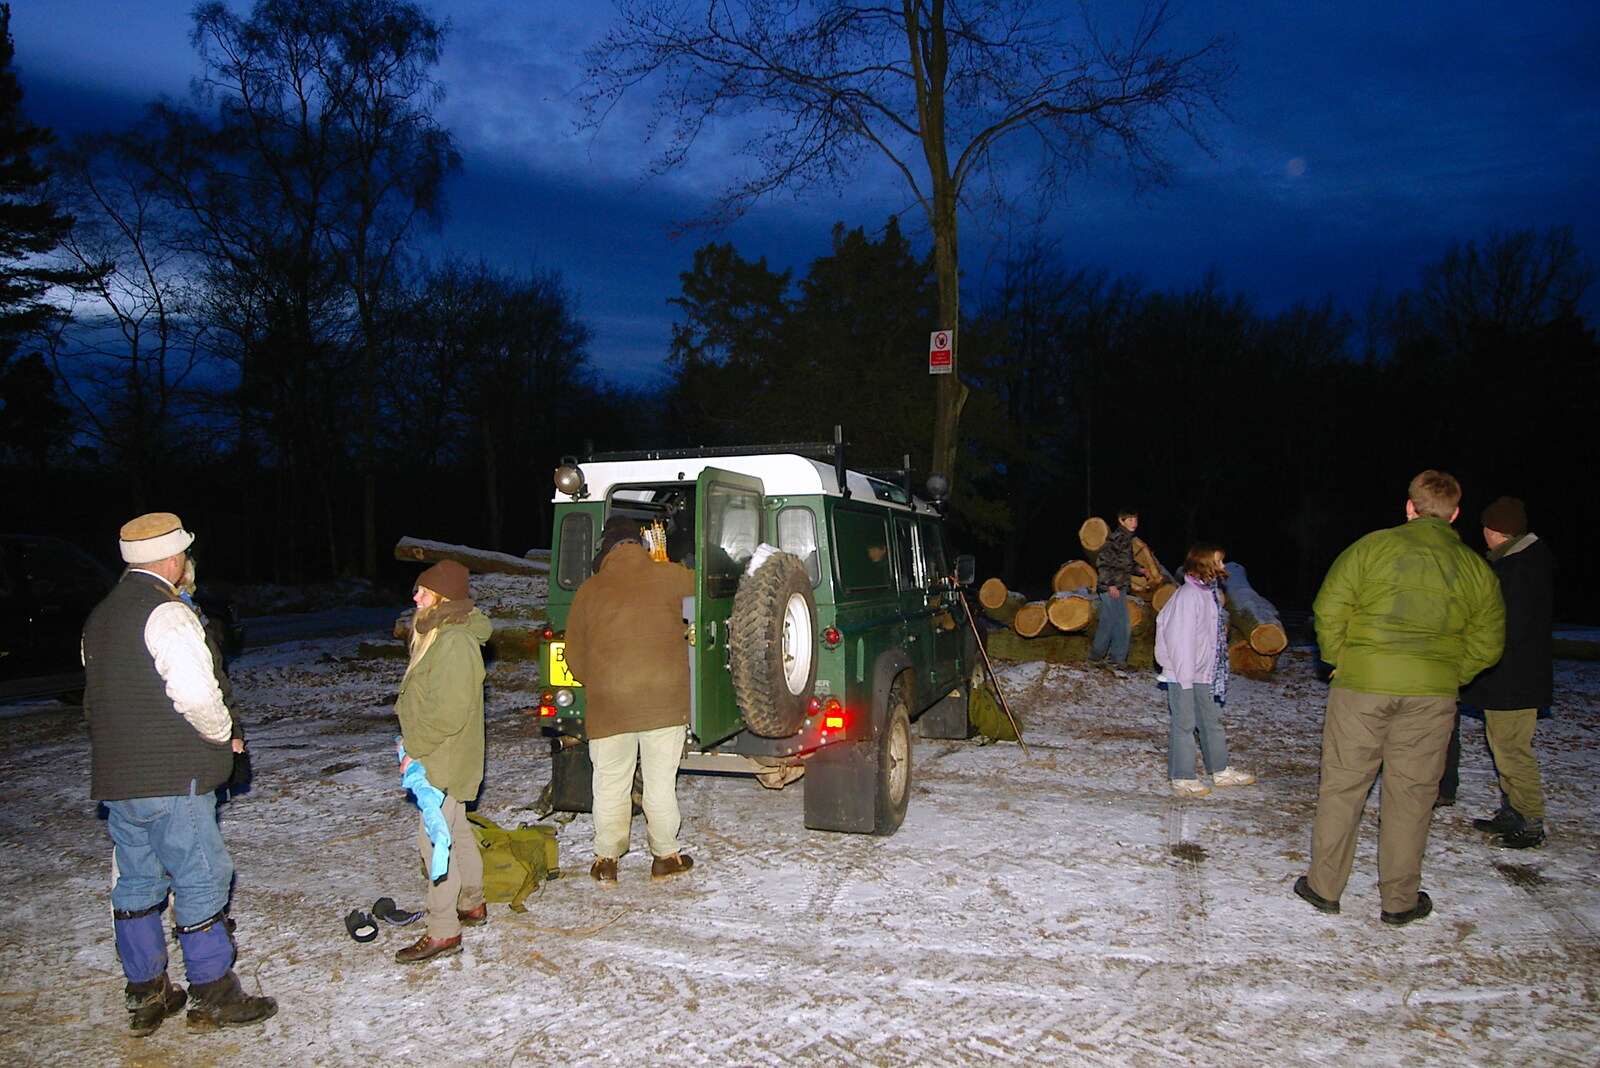 The group disbands from Walk Like a Shadow: A Day With Ray Mears, Ashdown Forest, East Sussex - 29th December 2005